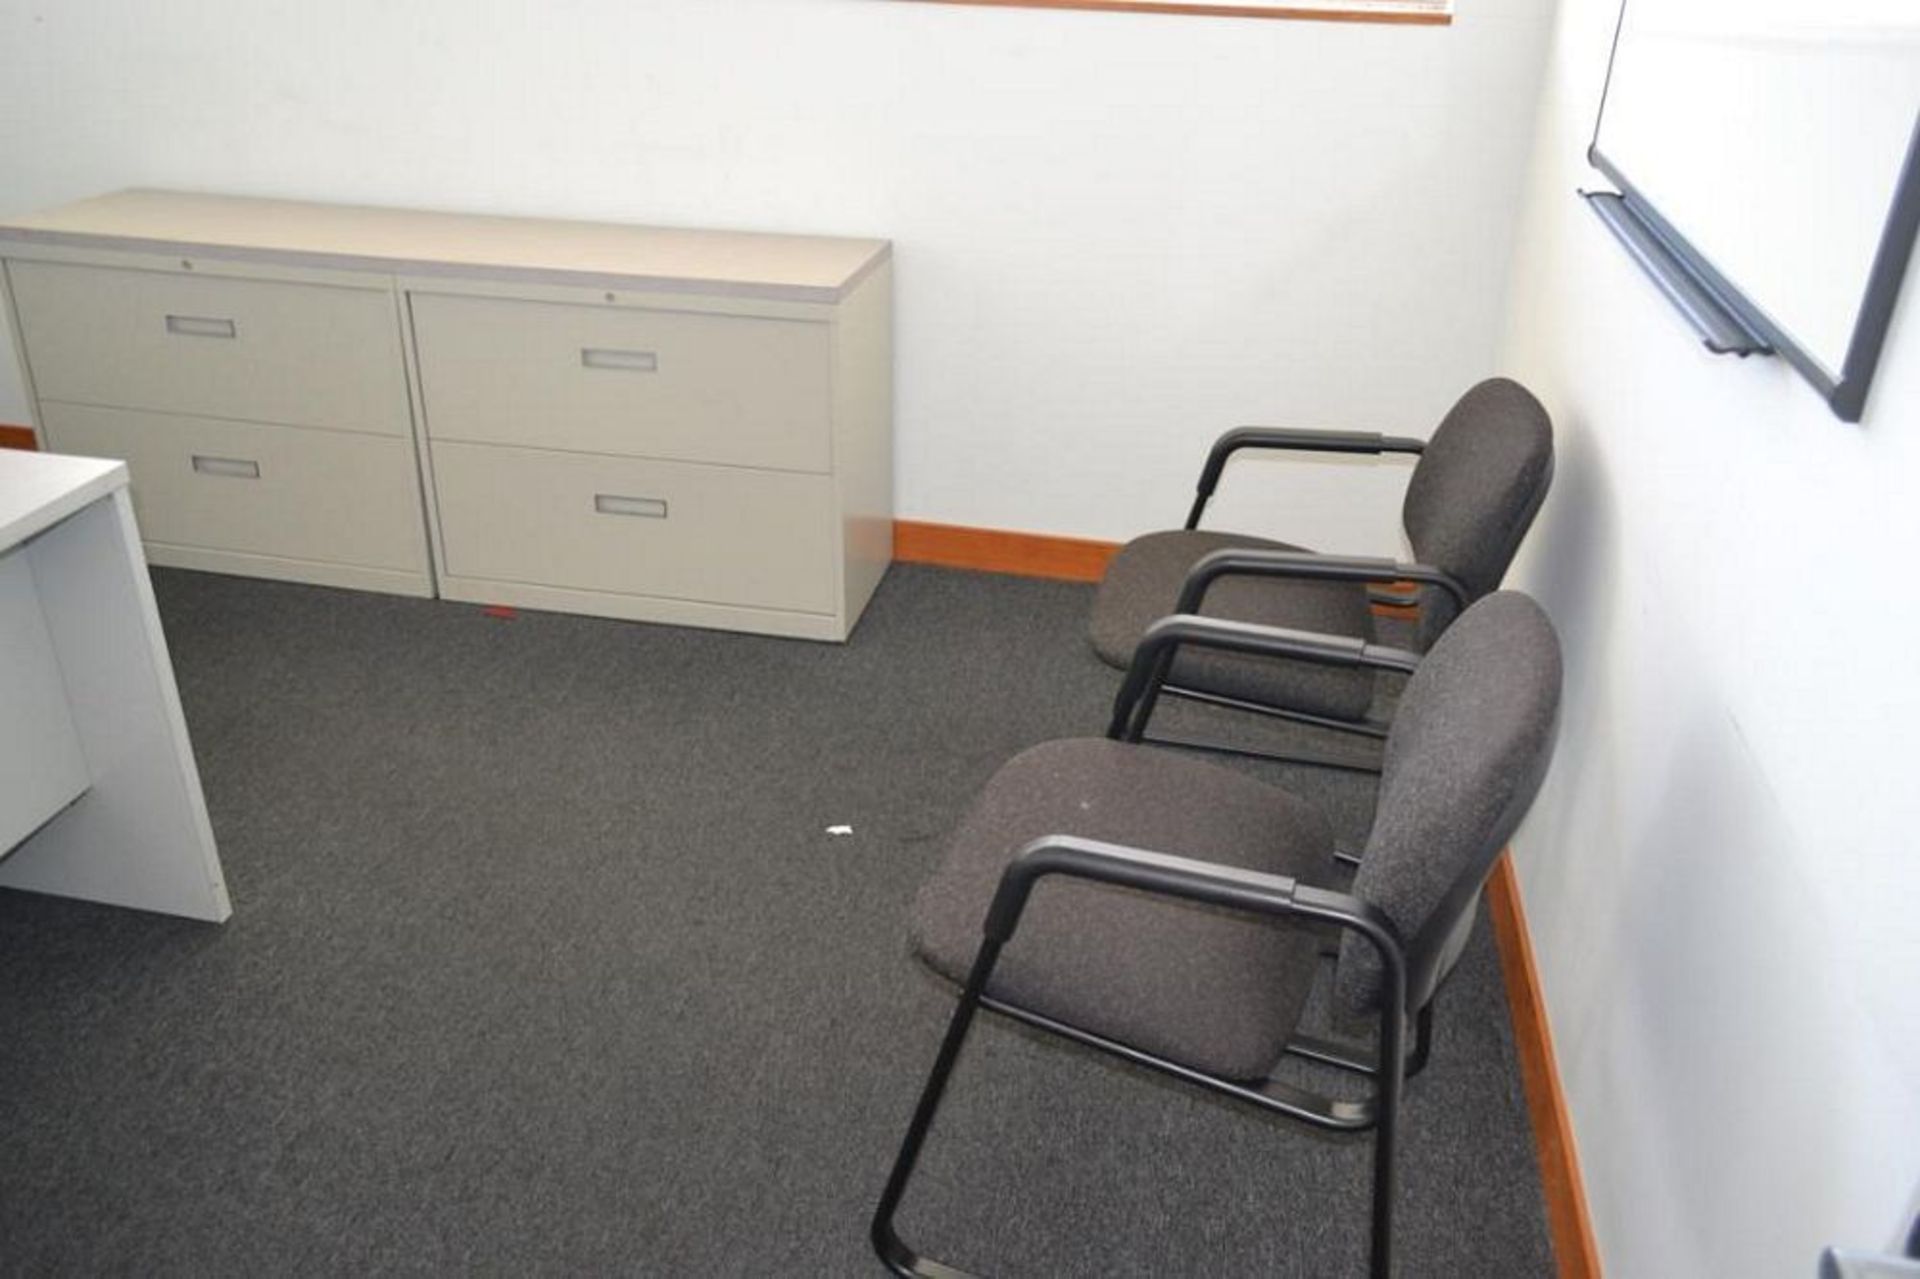 LOT: Contents of (3) Offices including (3) L-Shaped Desks, (3) File Cabinets, (9) Assorted Chairs - Image 7 of 7